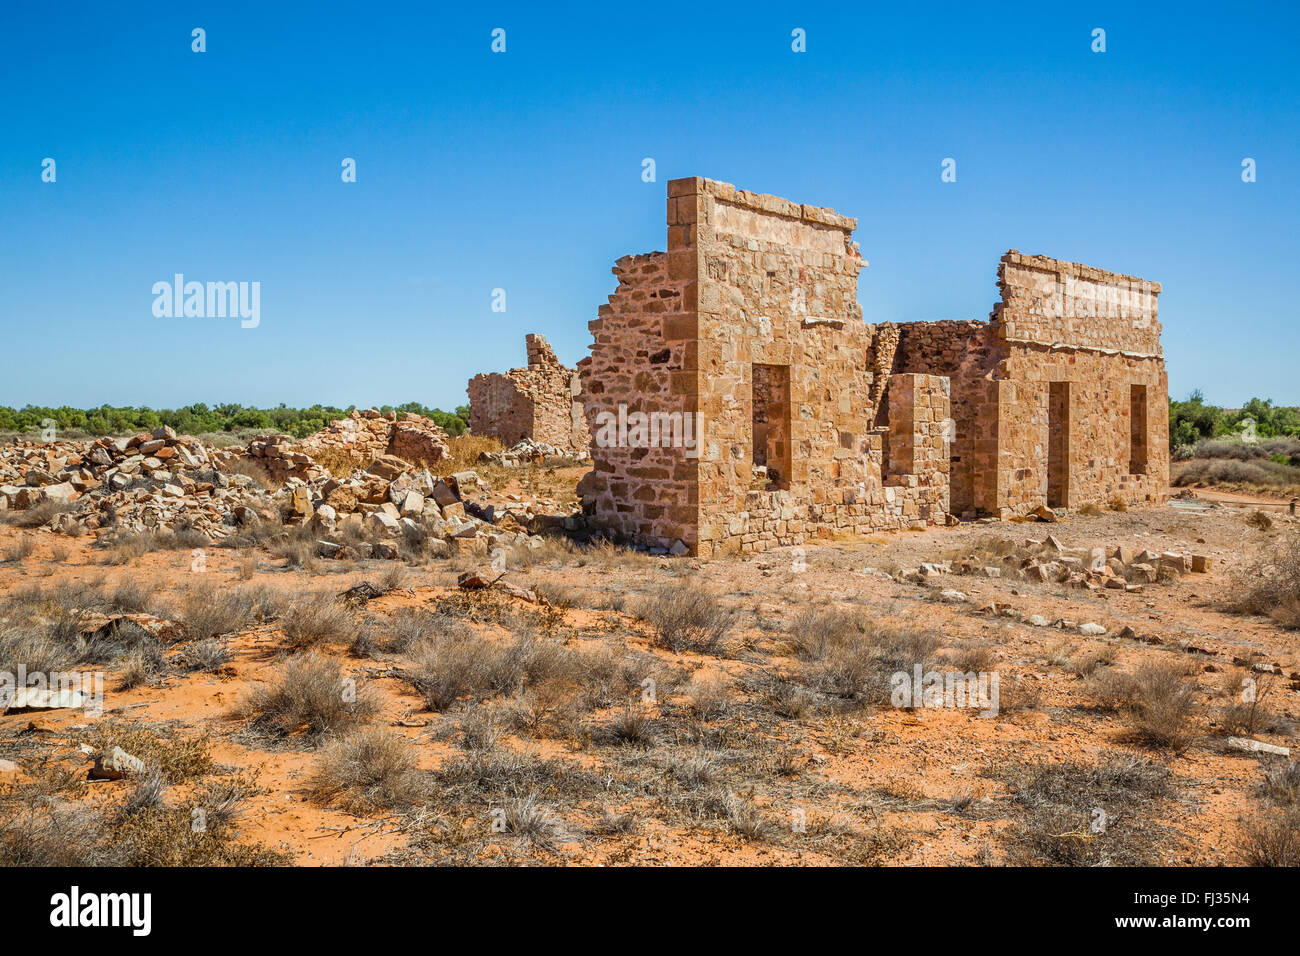 ruins at Farina ghost town, which fell into decline with the closure of the old Ghan Railway in South Australia Stock Photo